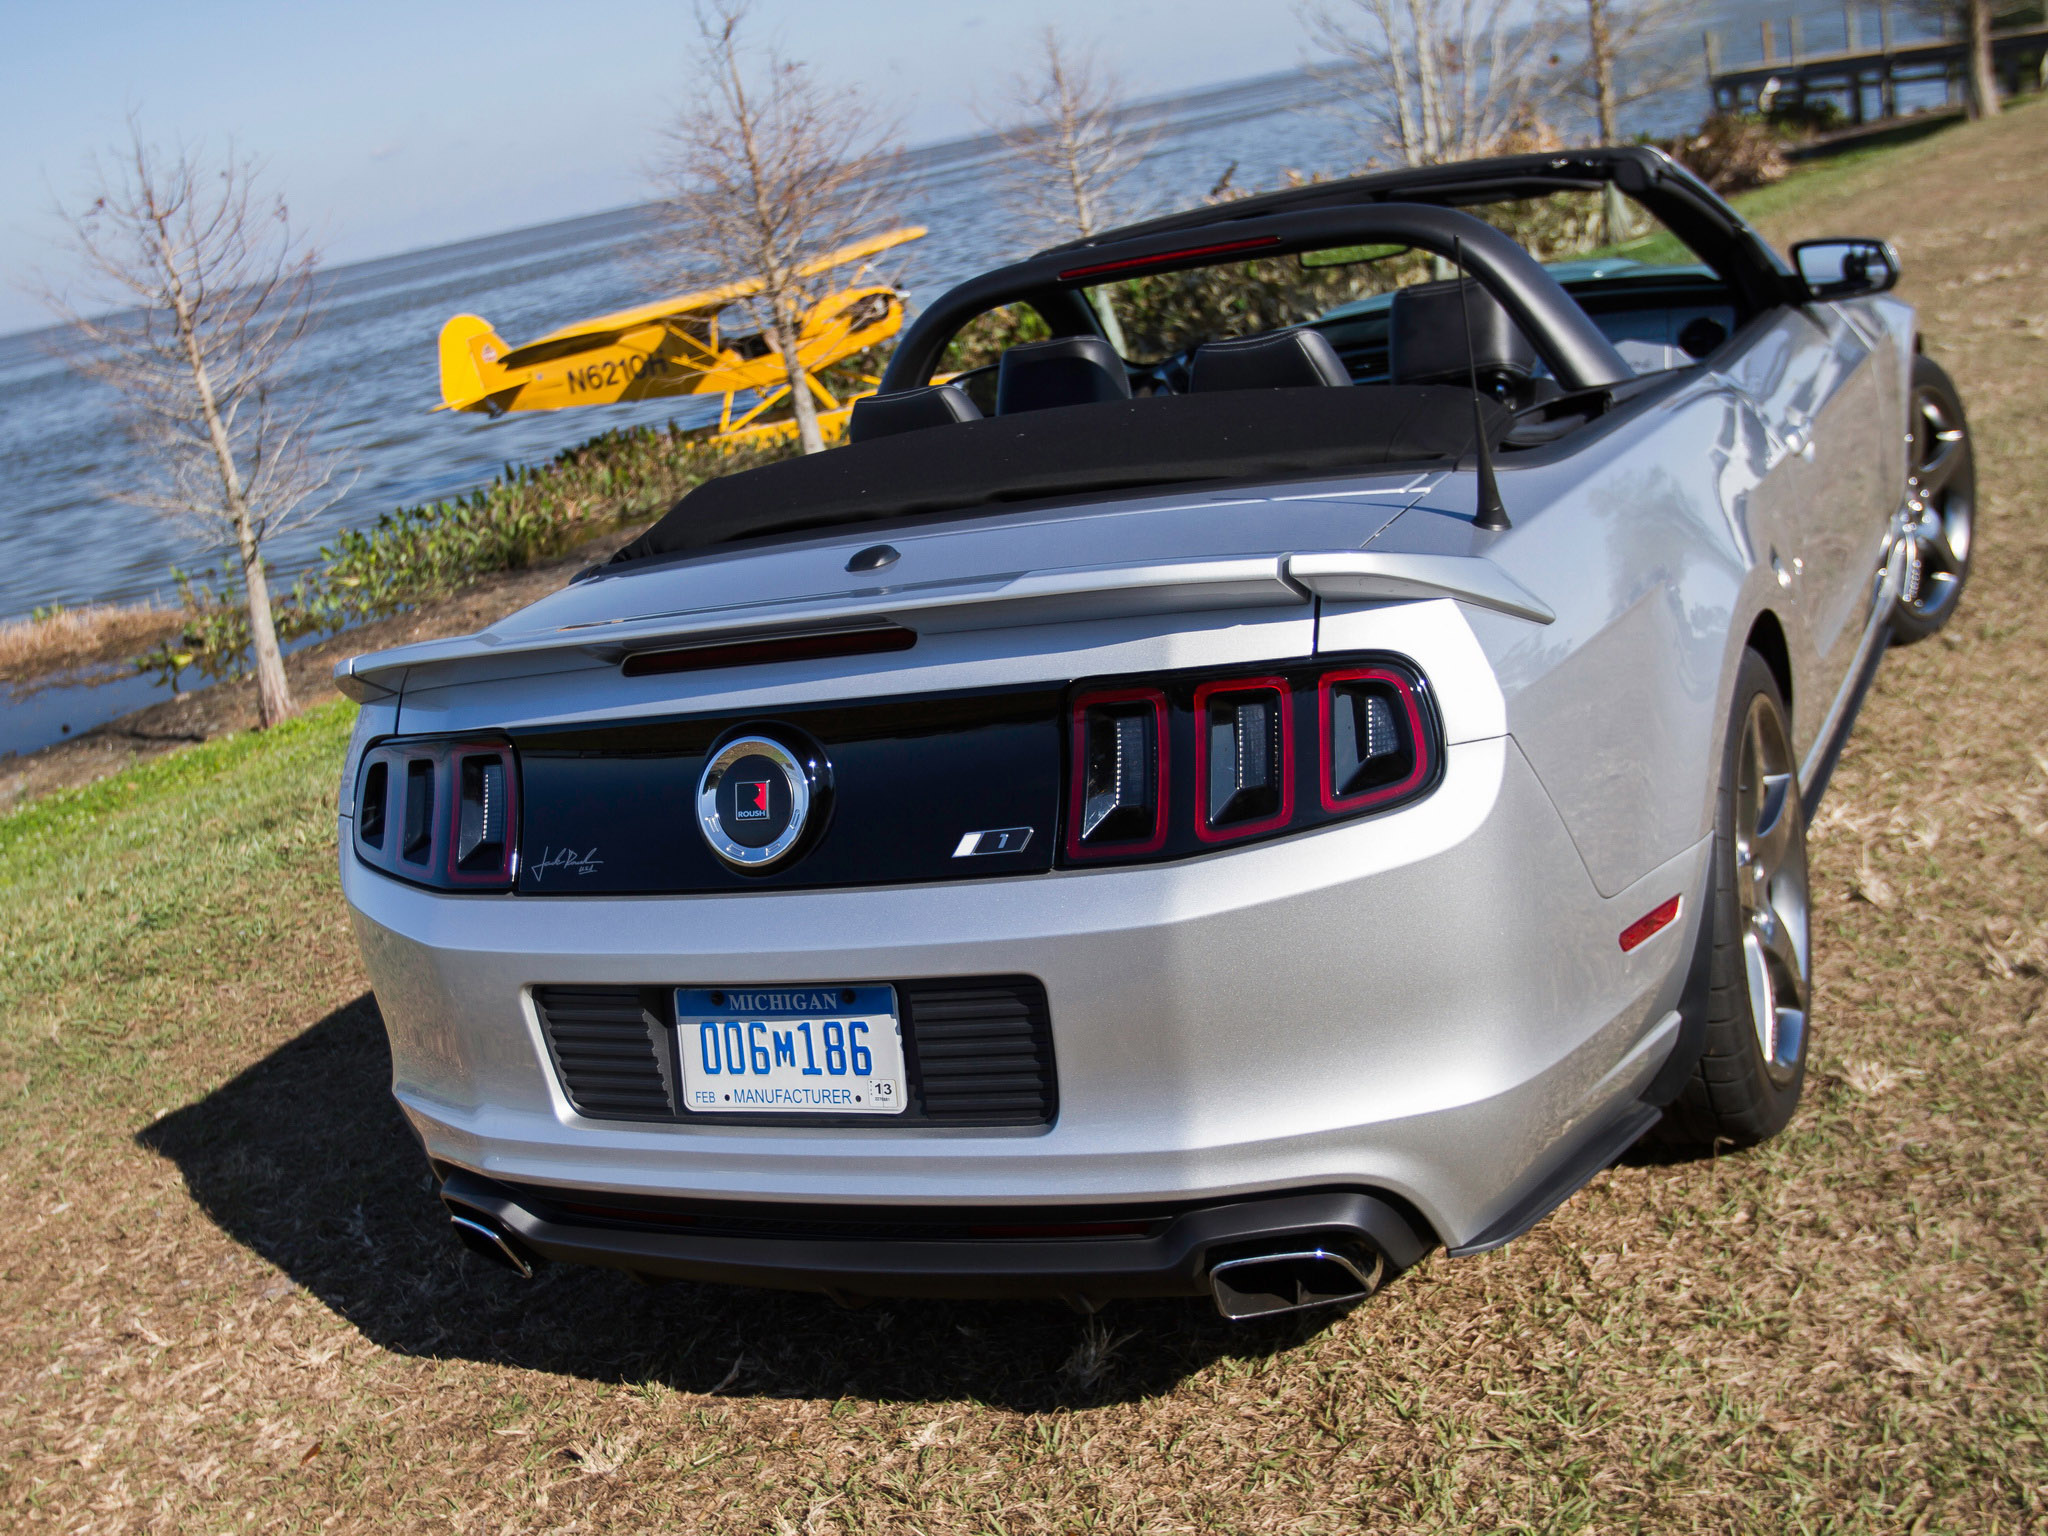 2013, Roush, Ford, Mustang, Stage 1, Convertible, Muscle, Supercar, Supercars Wallpaper